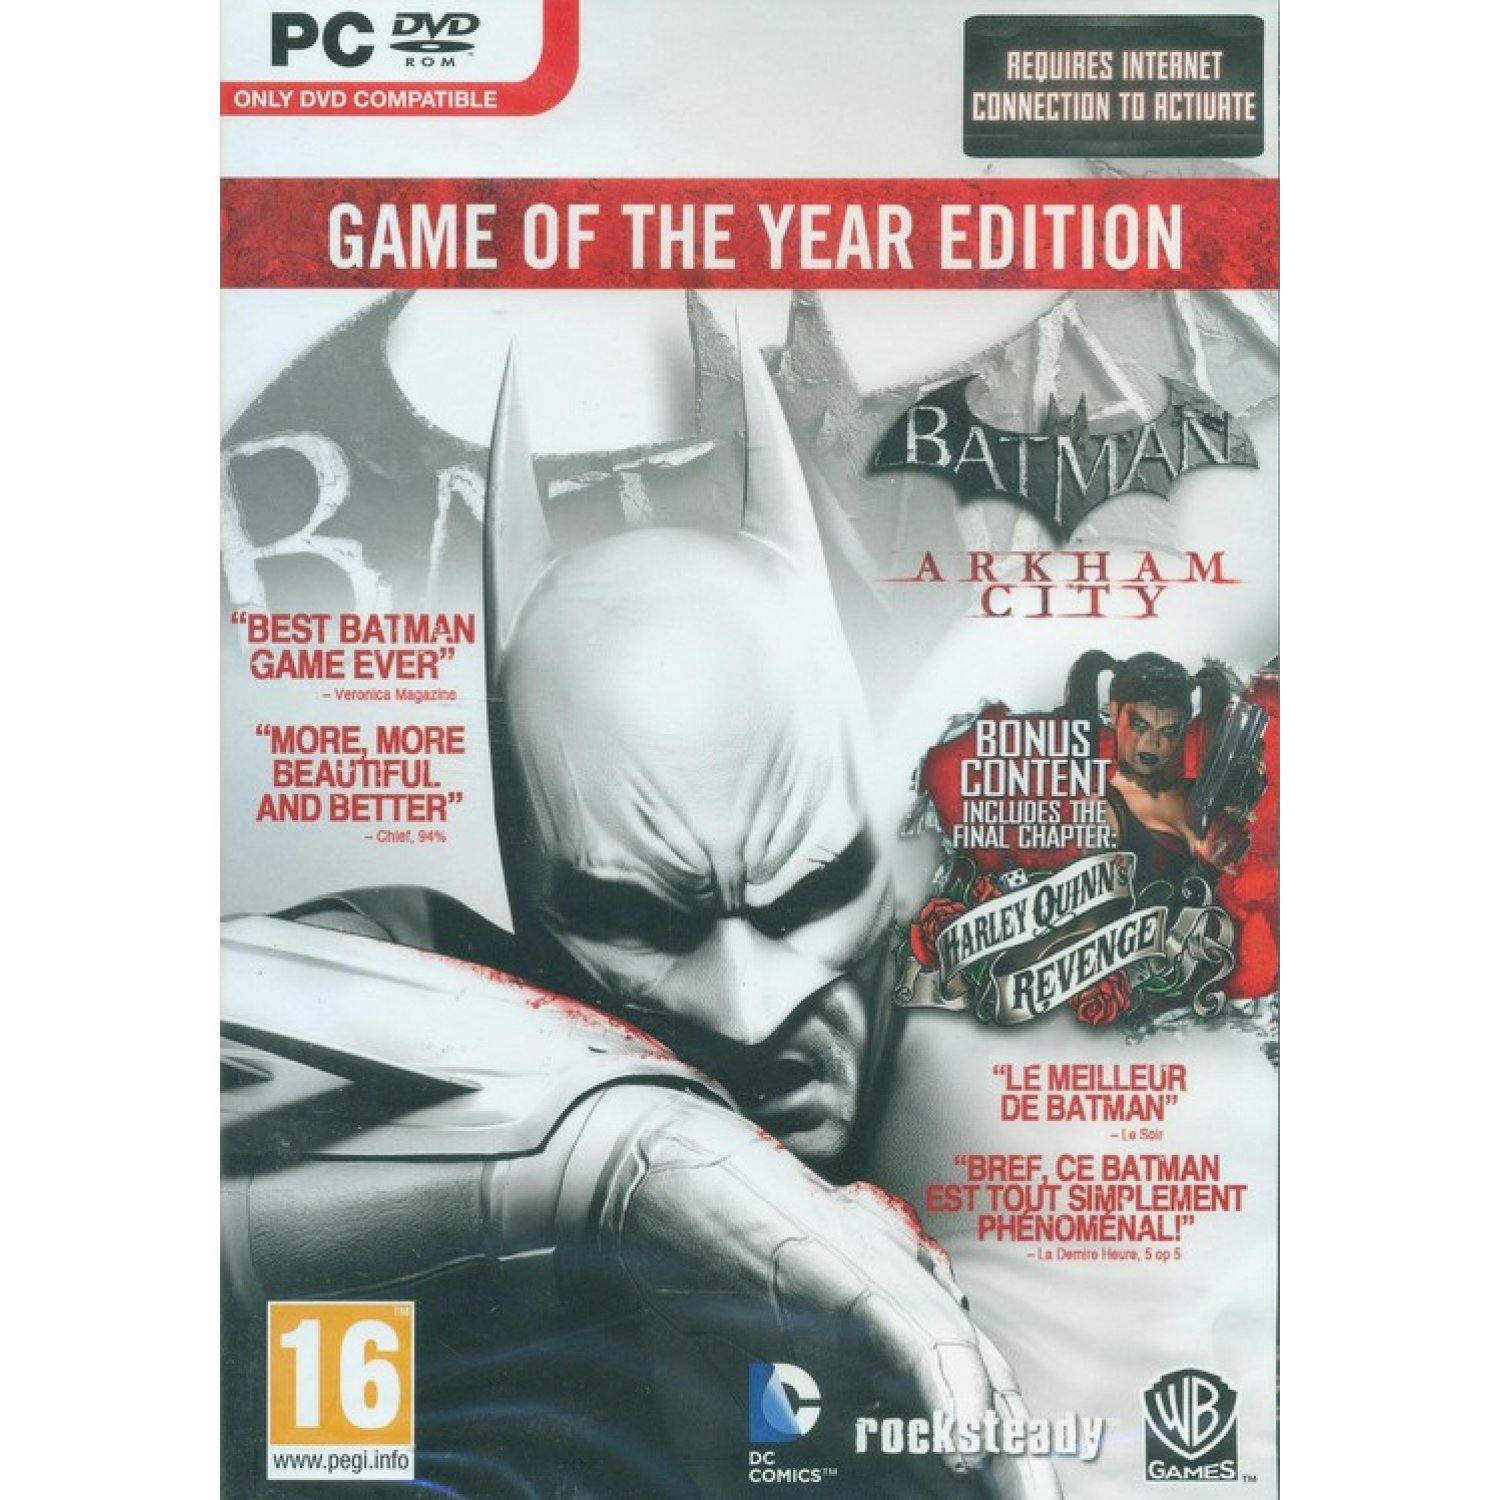 Batman Arkham Knight Premium Edition PS4/PS5, Video Gaming, Video Games,  PlayStation on Carousell